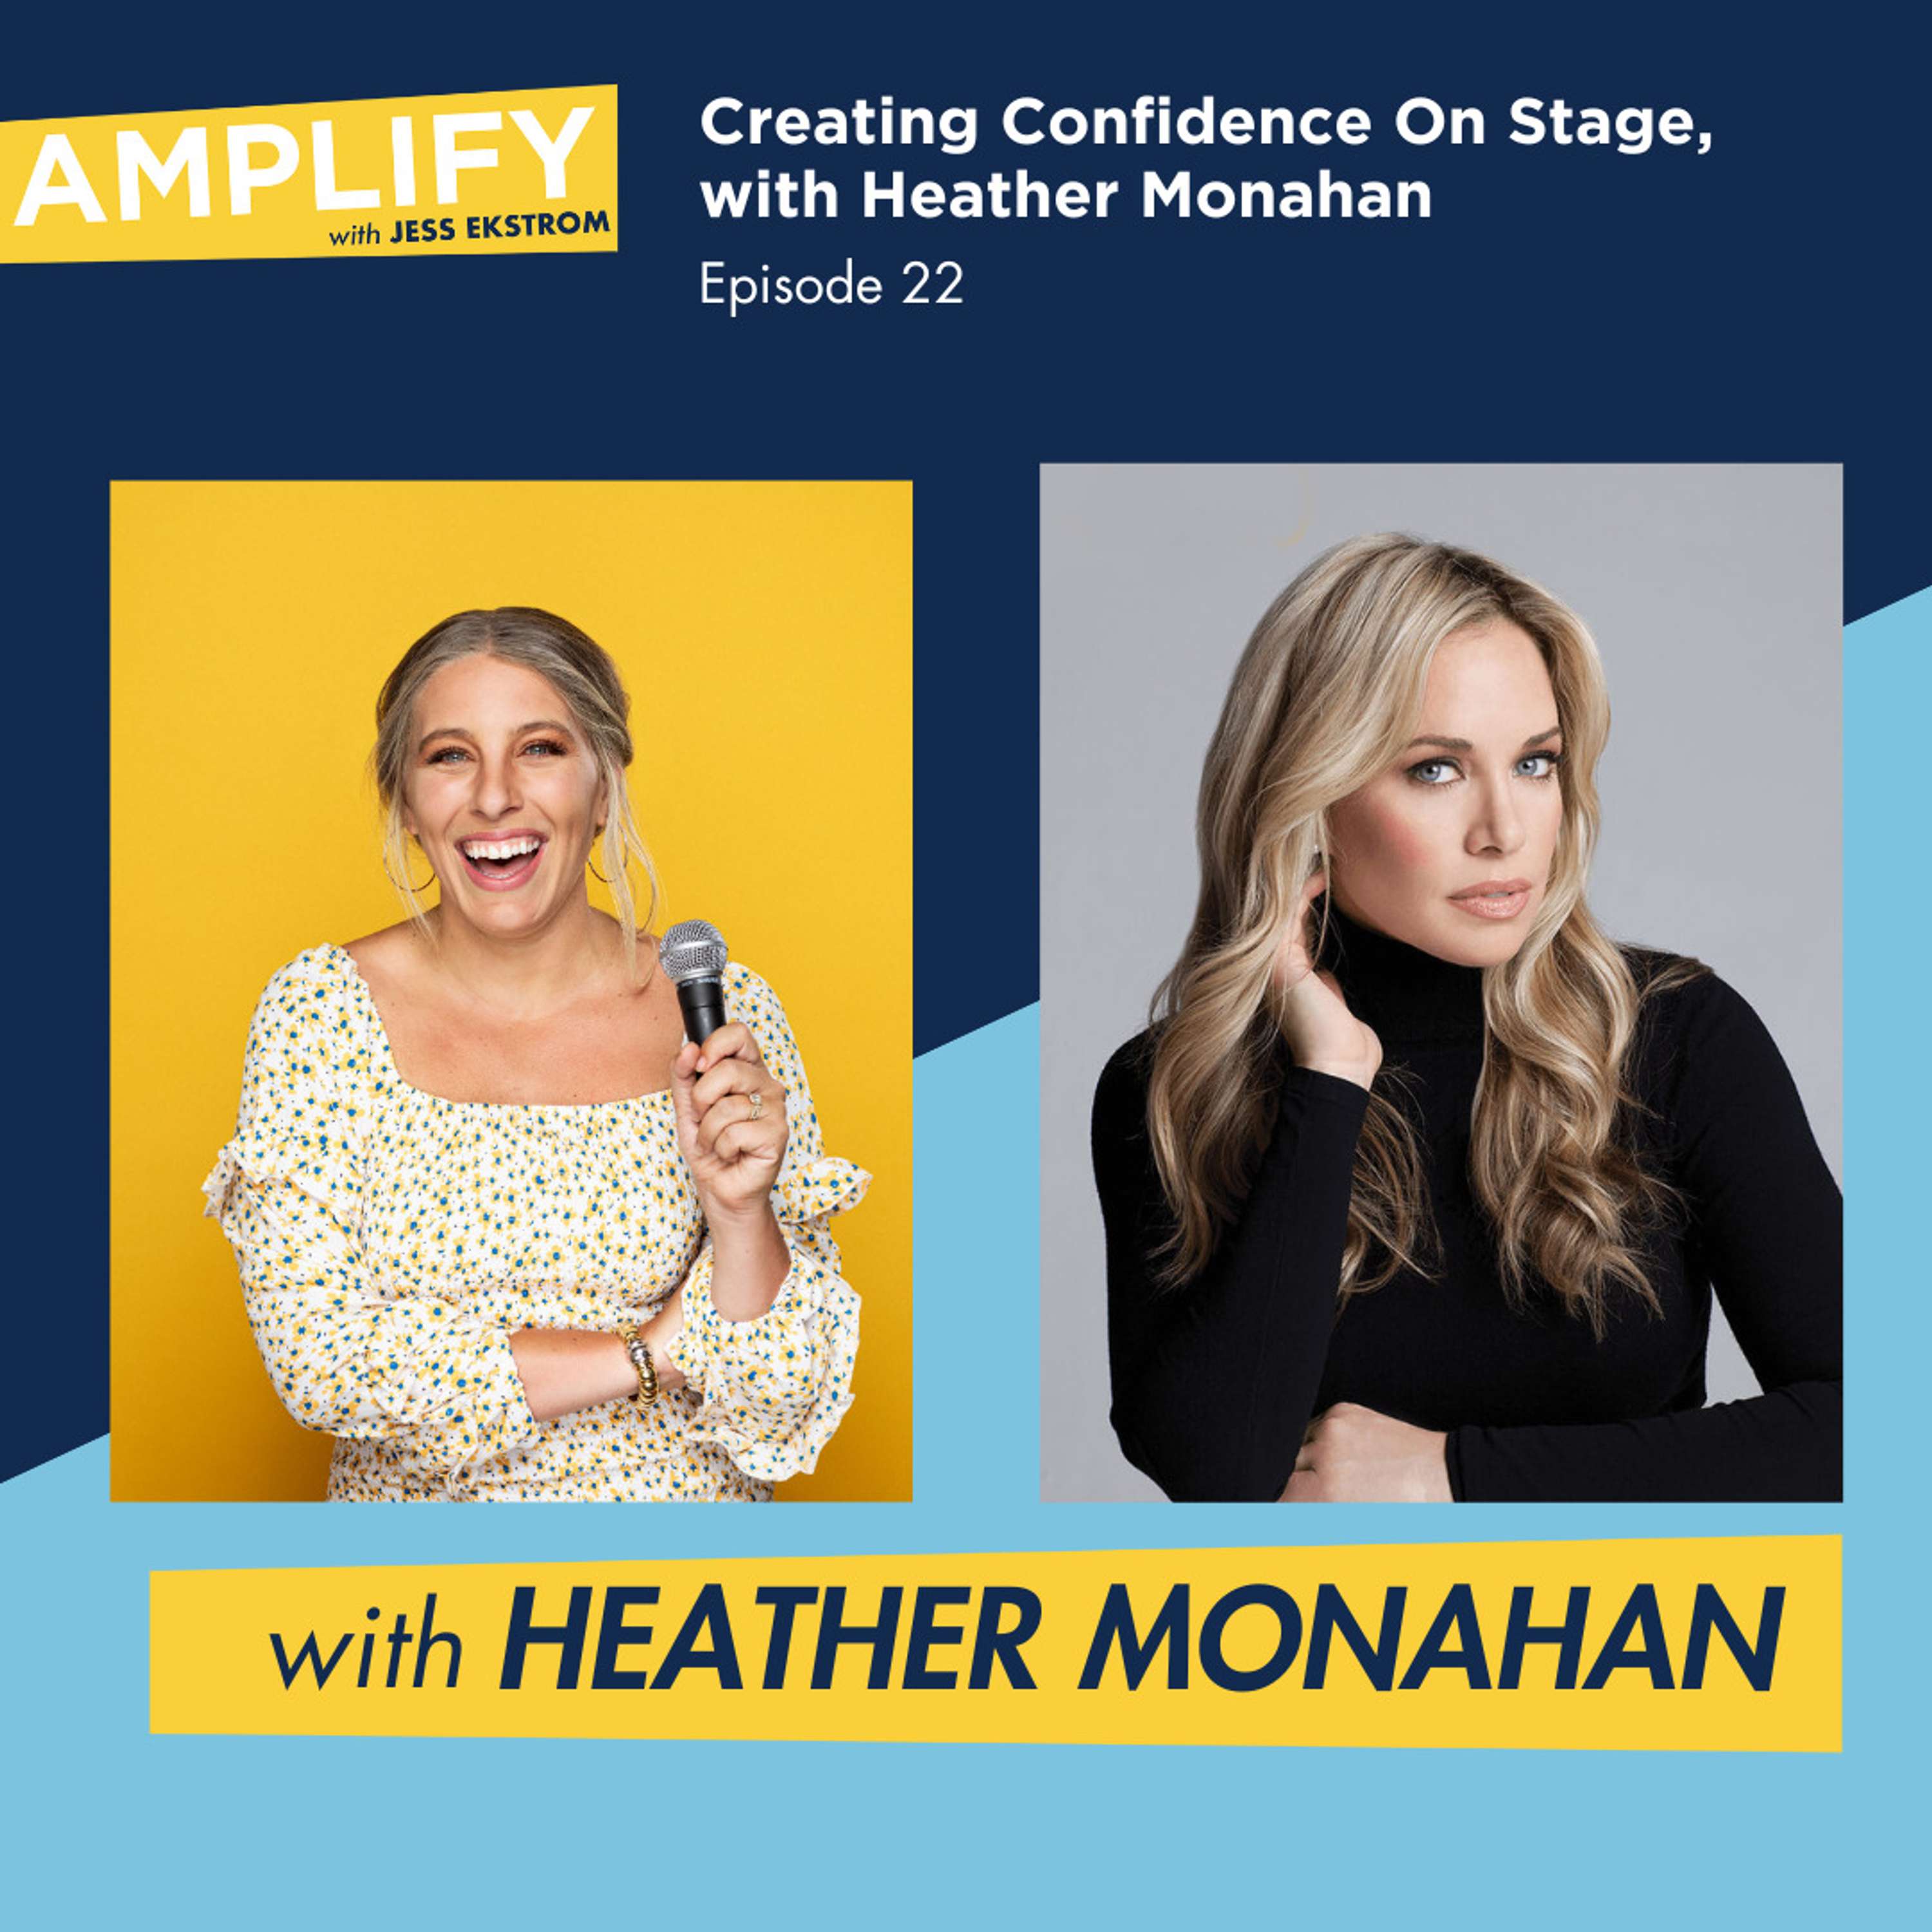 22. Creating Confidence On Stage, with Heather Monahan